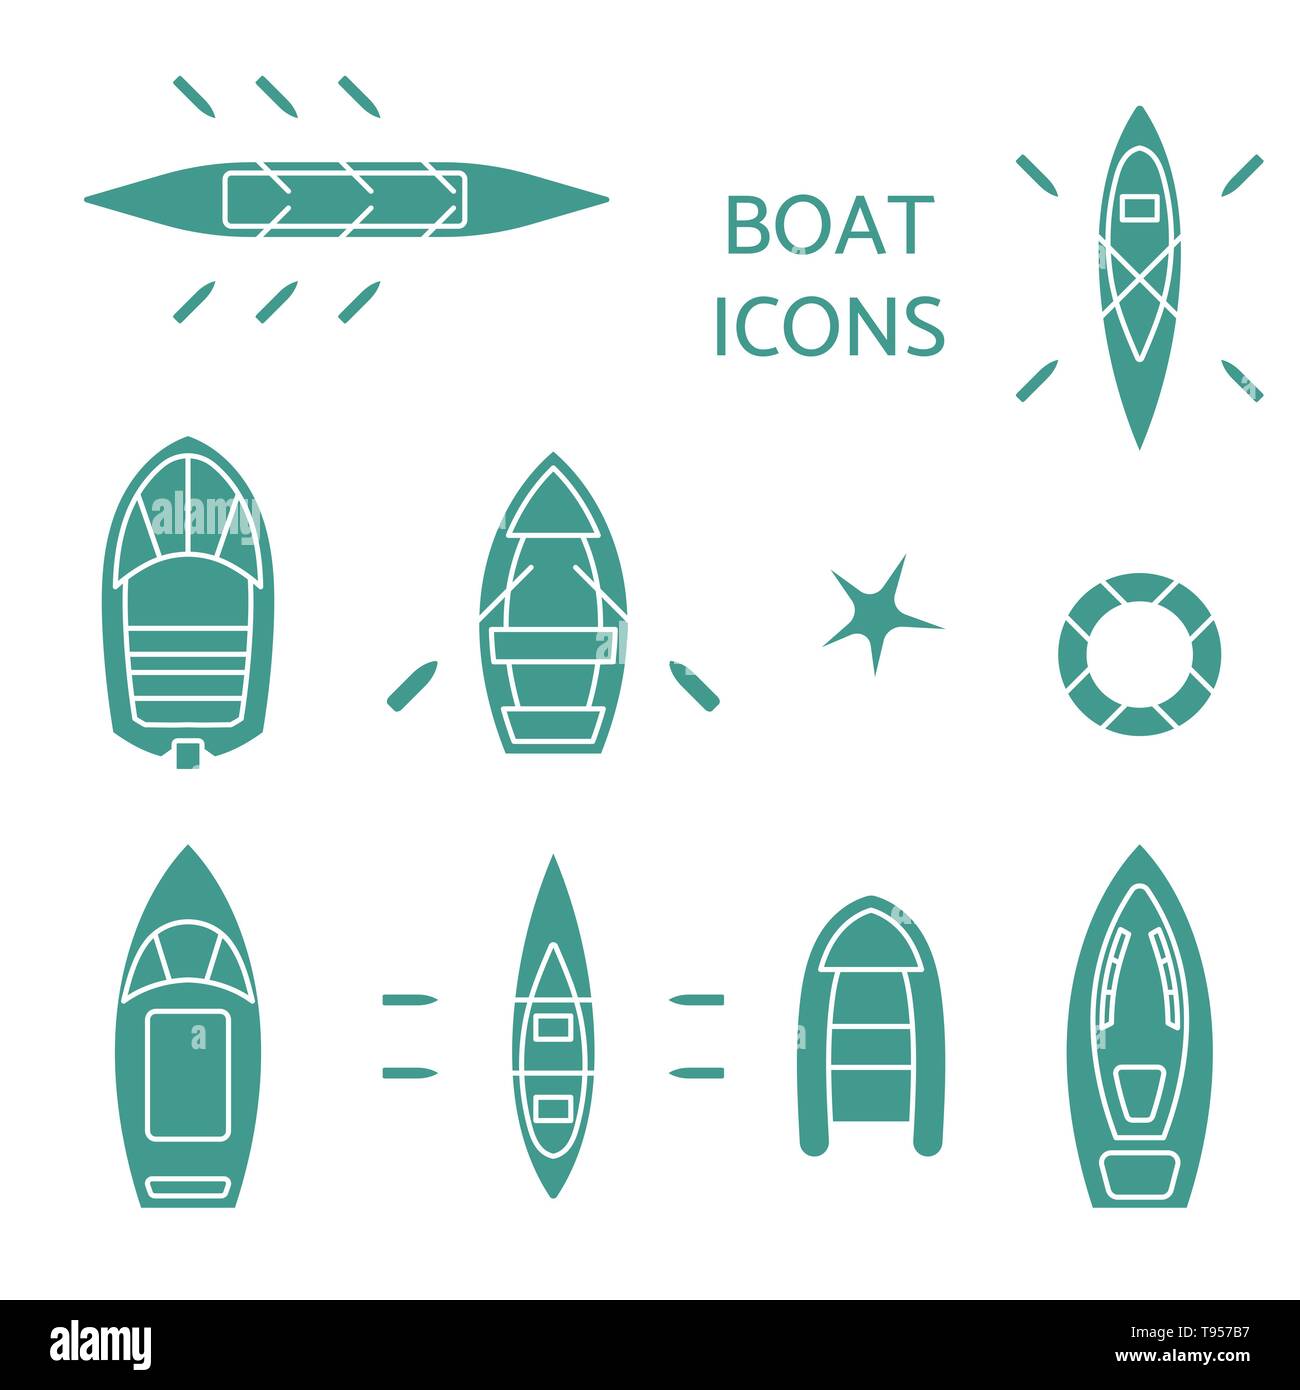 Boat icons set. Stock Vector